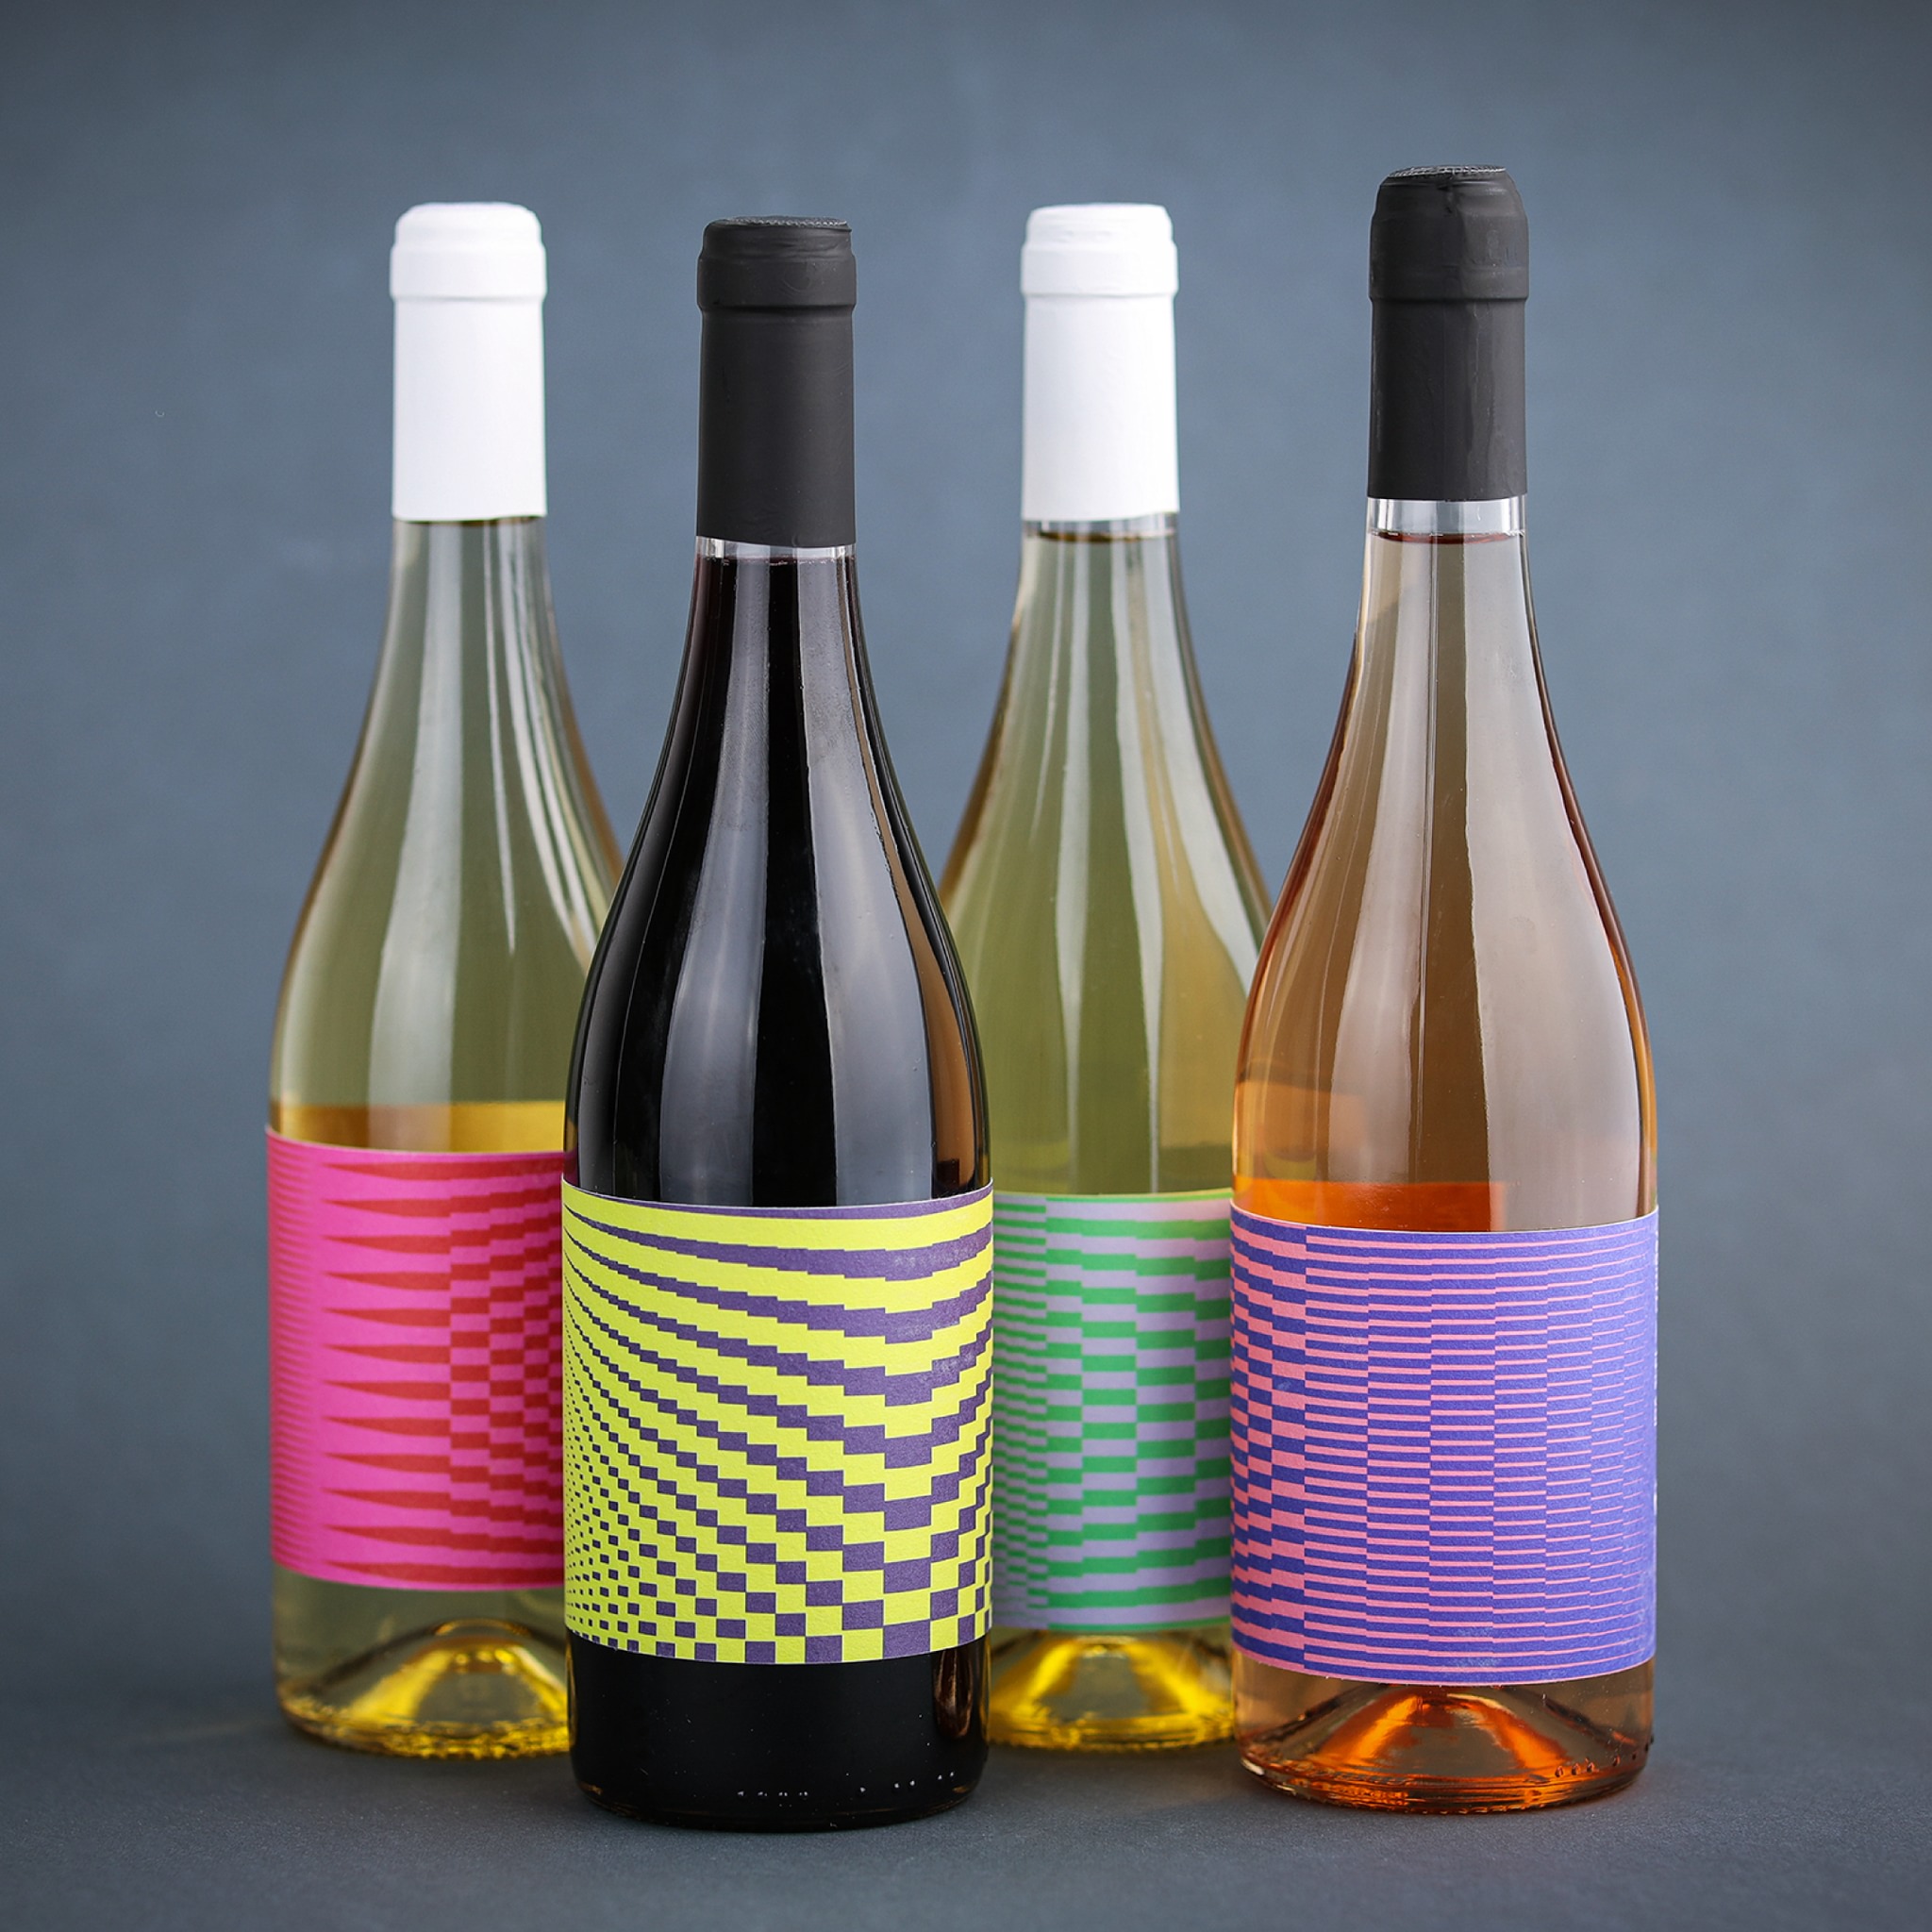 Volume Wines Label Design Inspired by Musical Beats